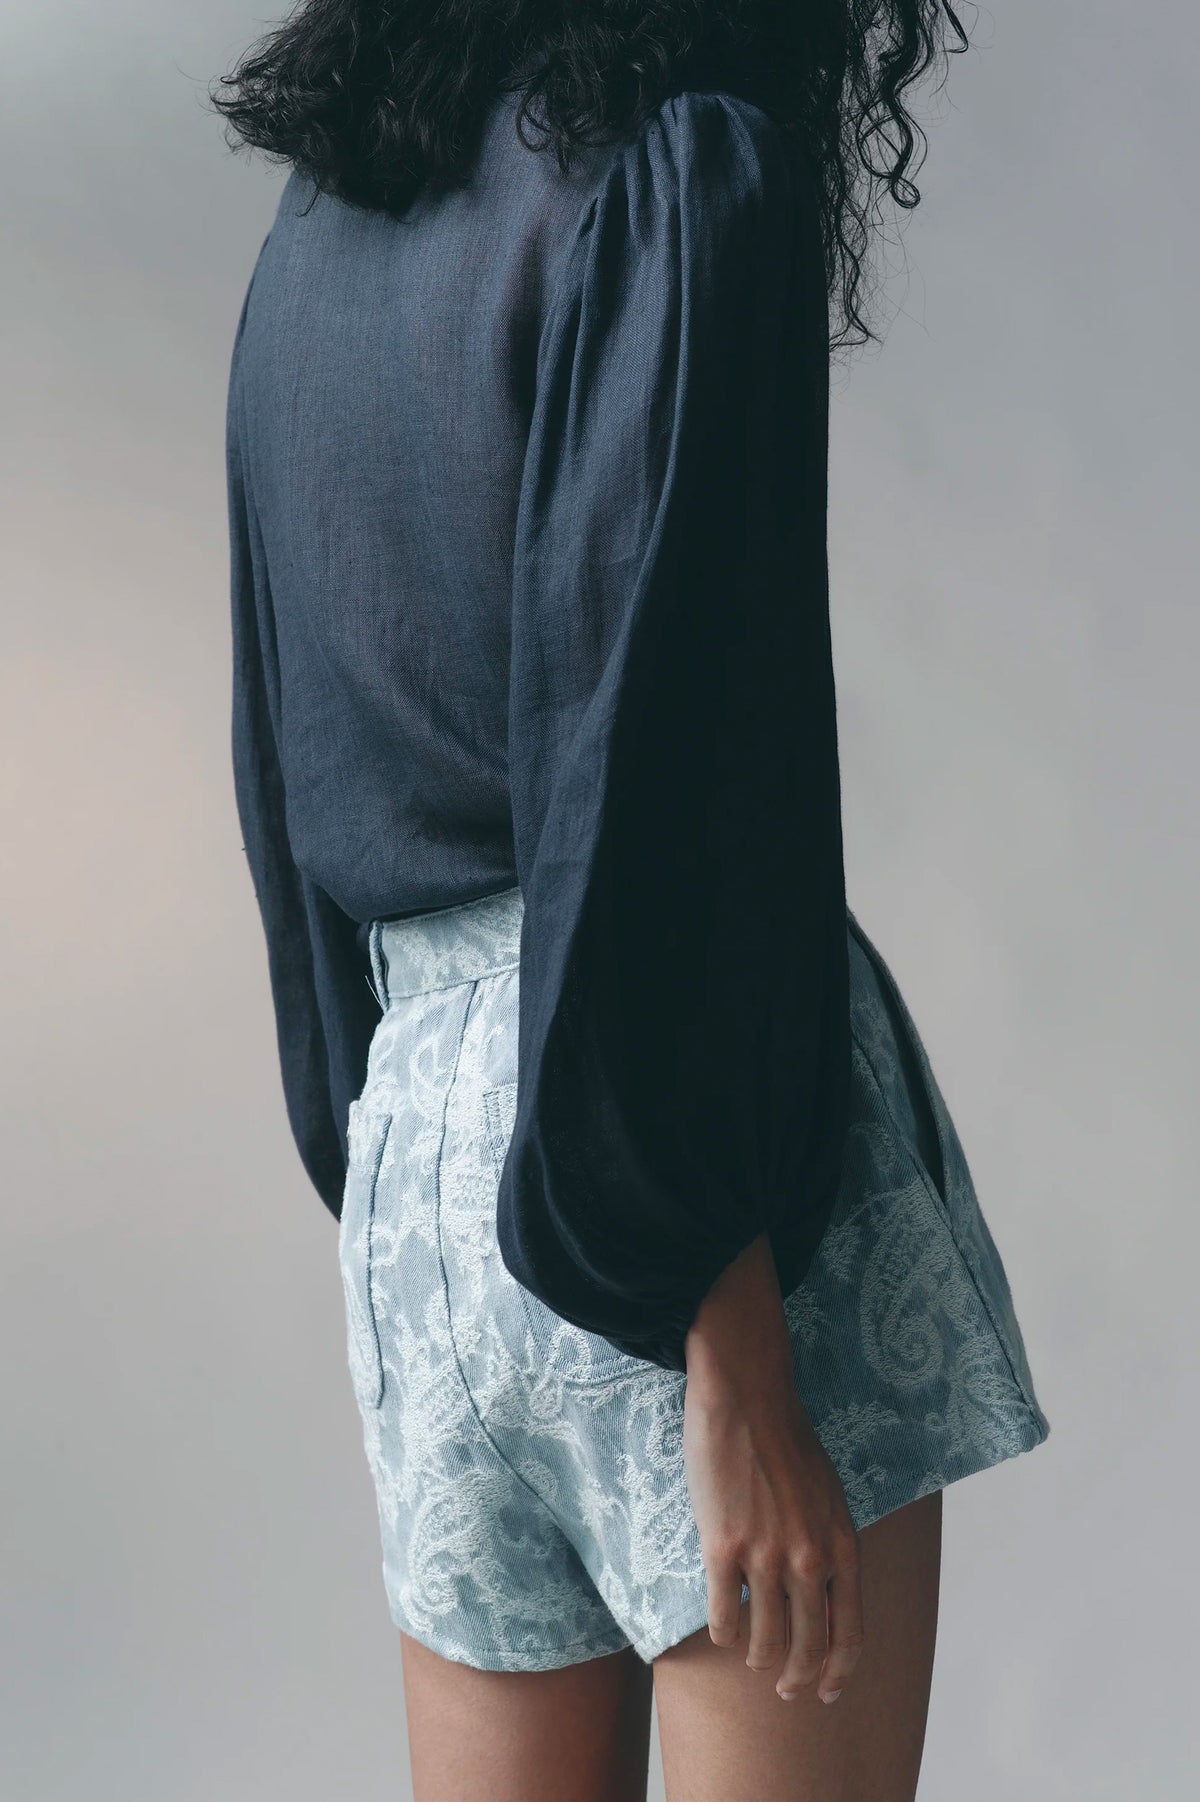 Maluku Blouse in Washed Navy Linen